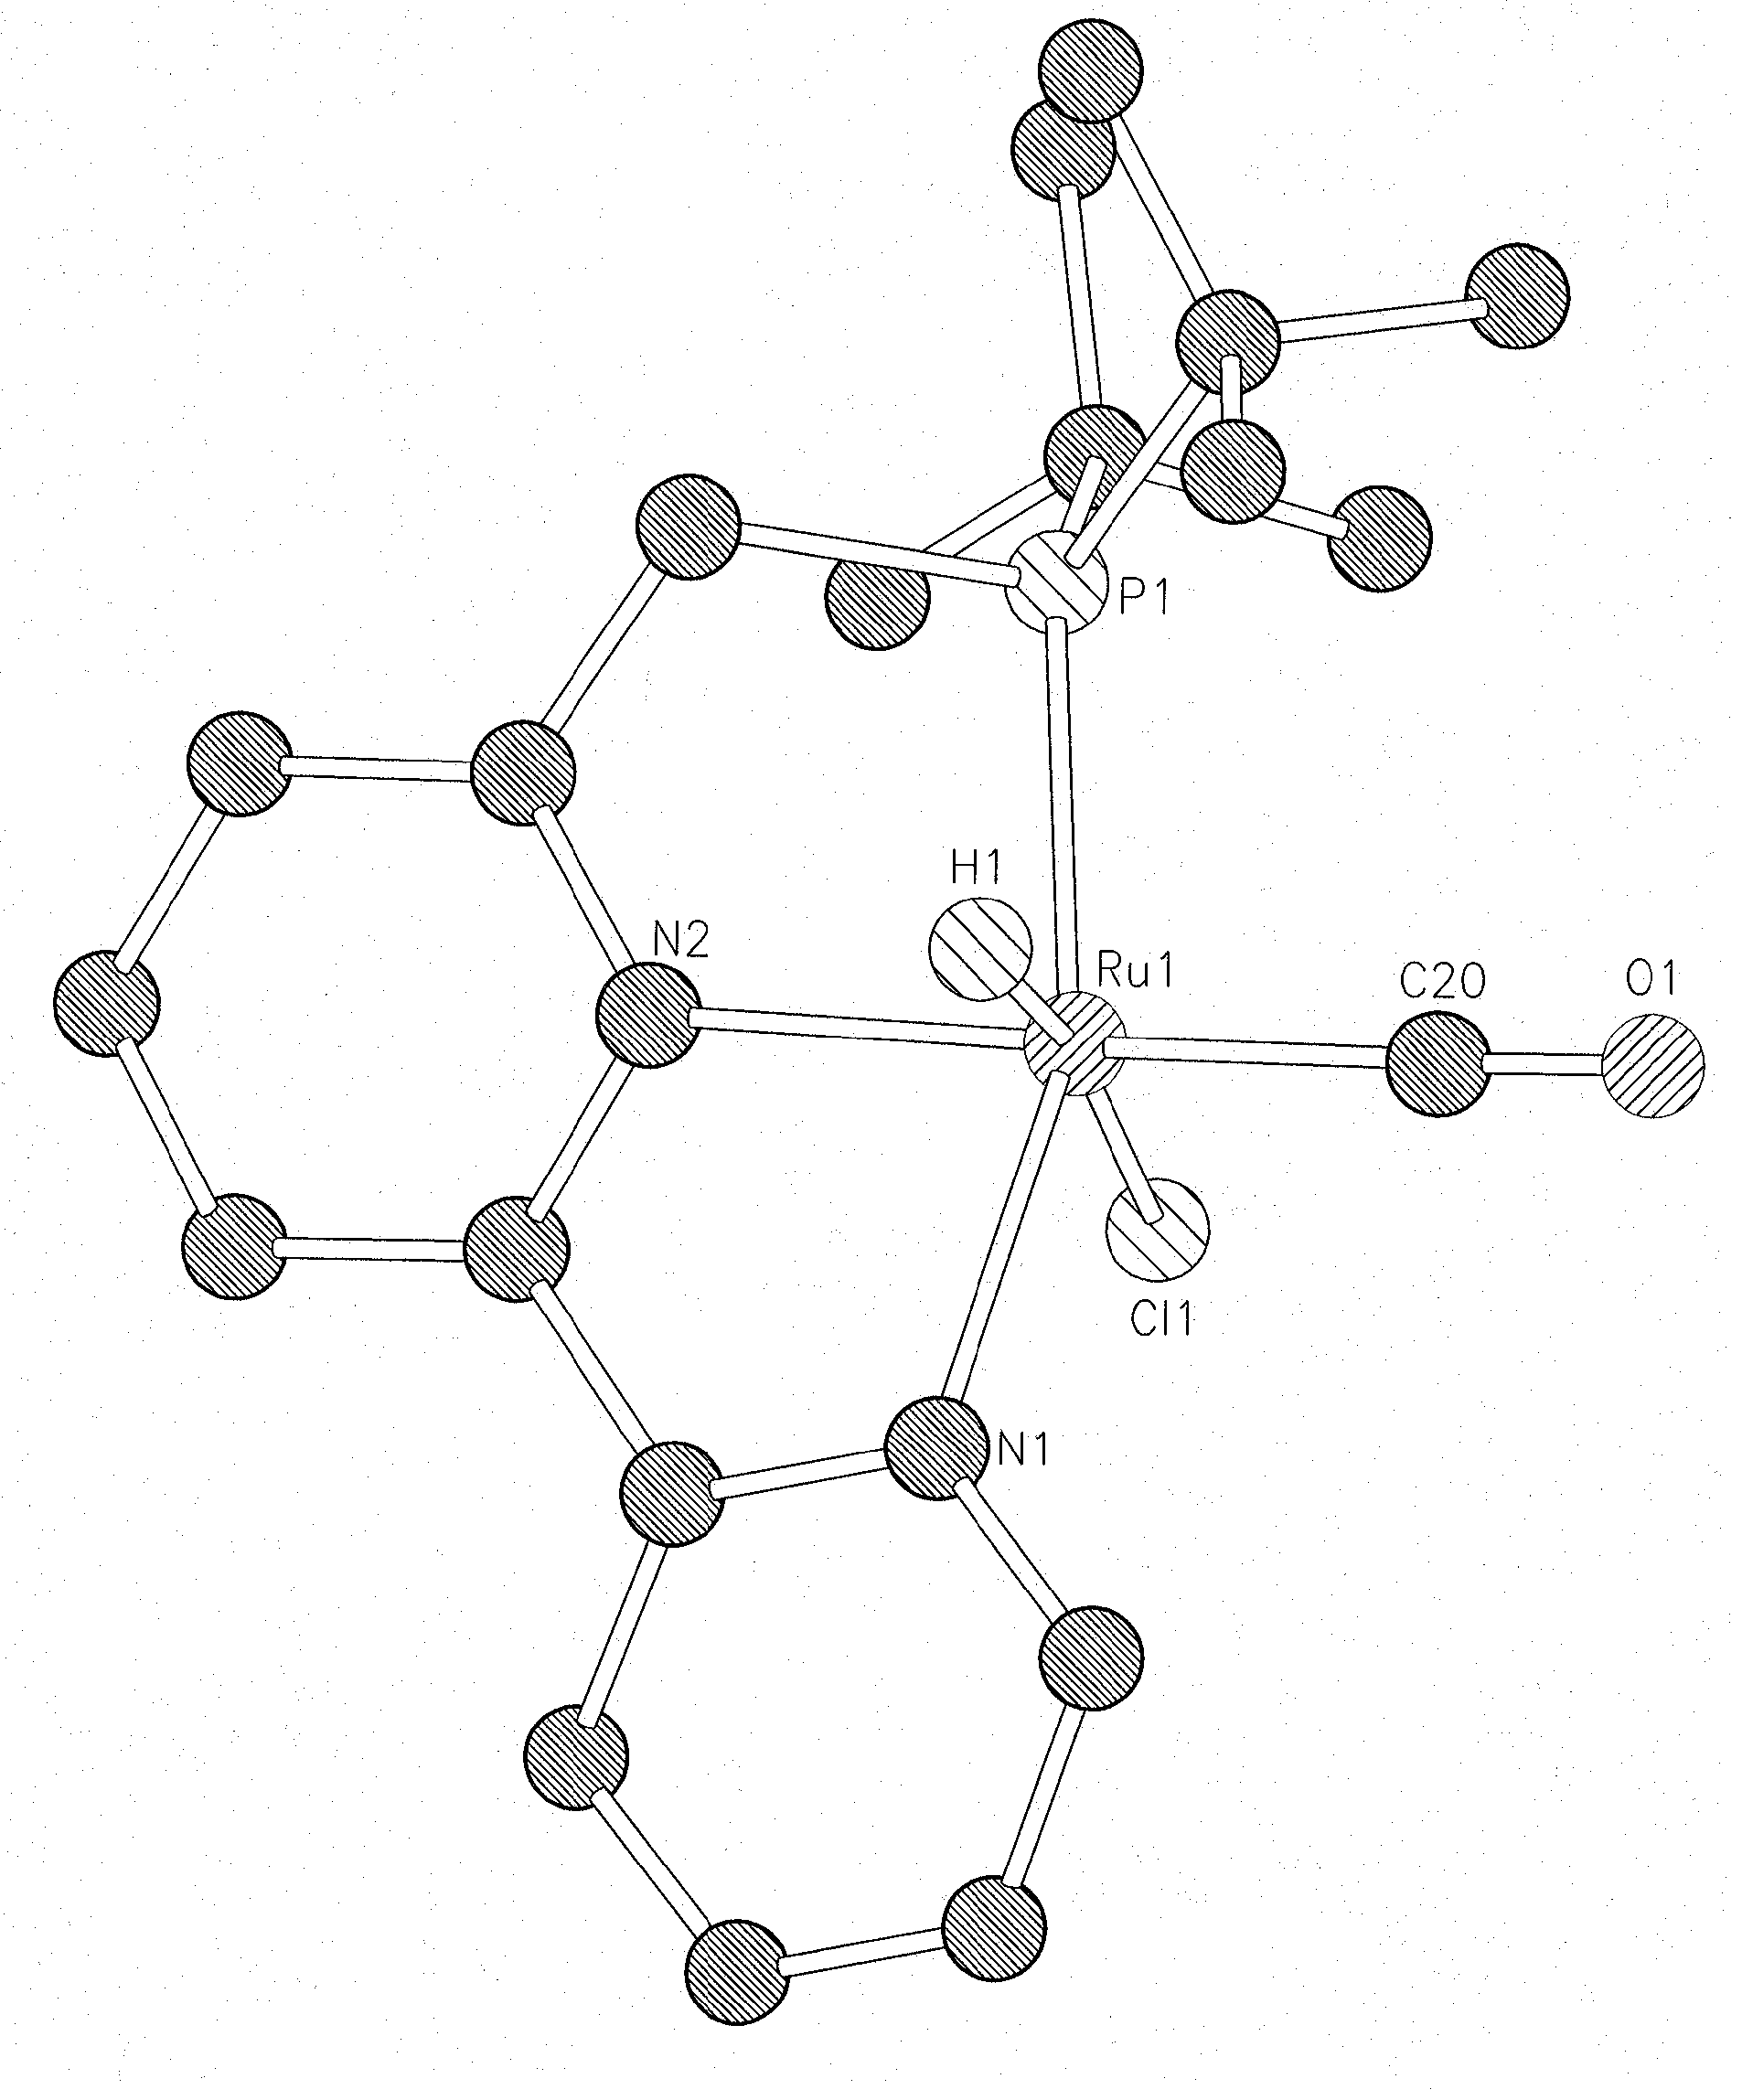 Novel ruthenium complexes and their uses in processes for formation and/or hydrogenation of esters, amides and derivatives thereof